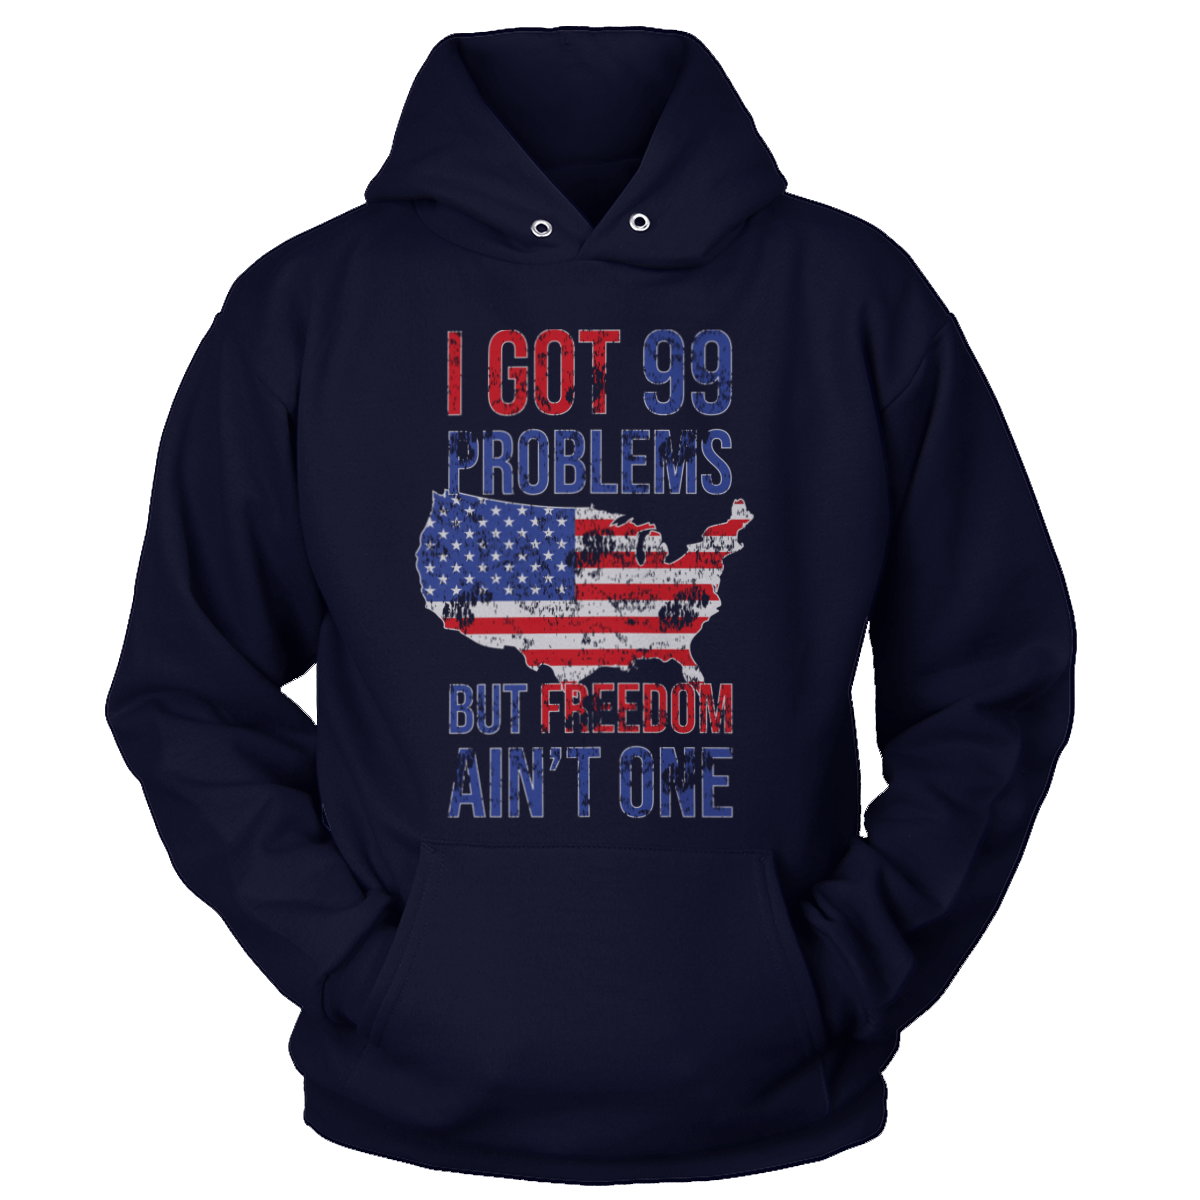 T-shirt Unisex Hoodie / Navy / S I Got 99 Problems But Freedom Ain't One